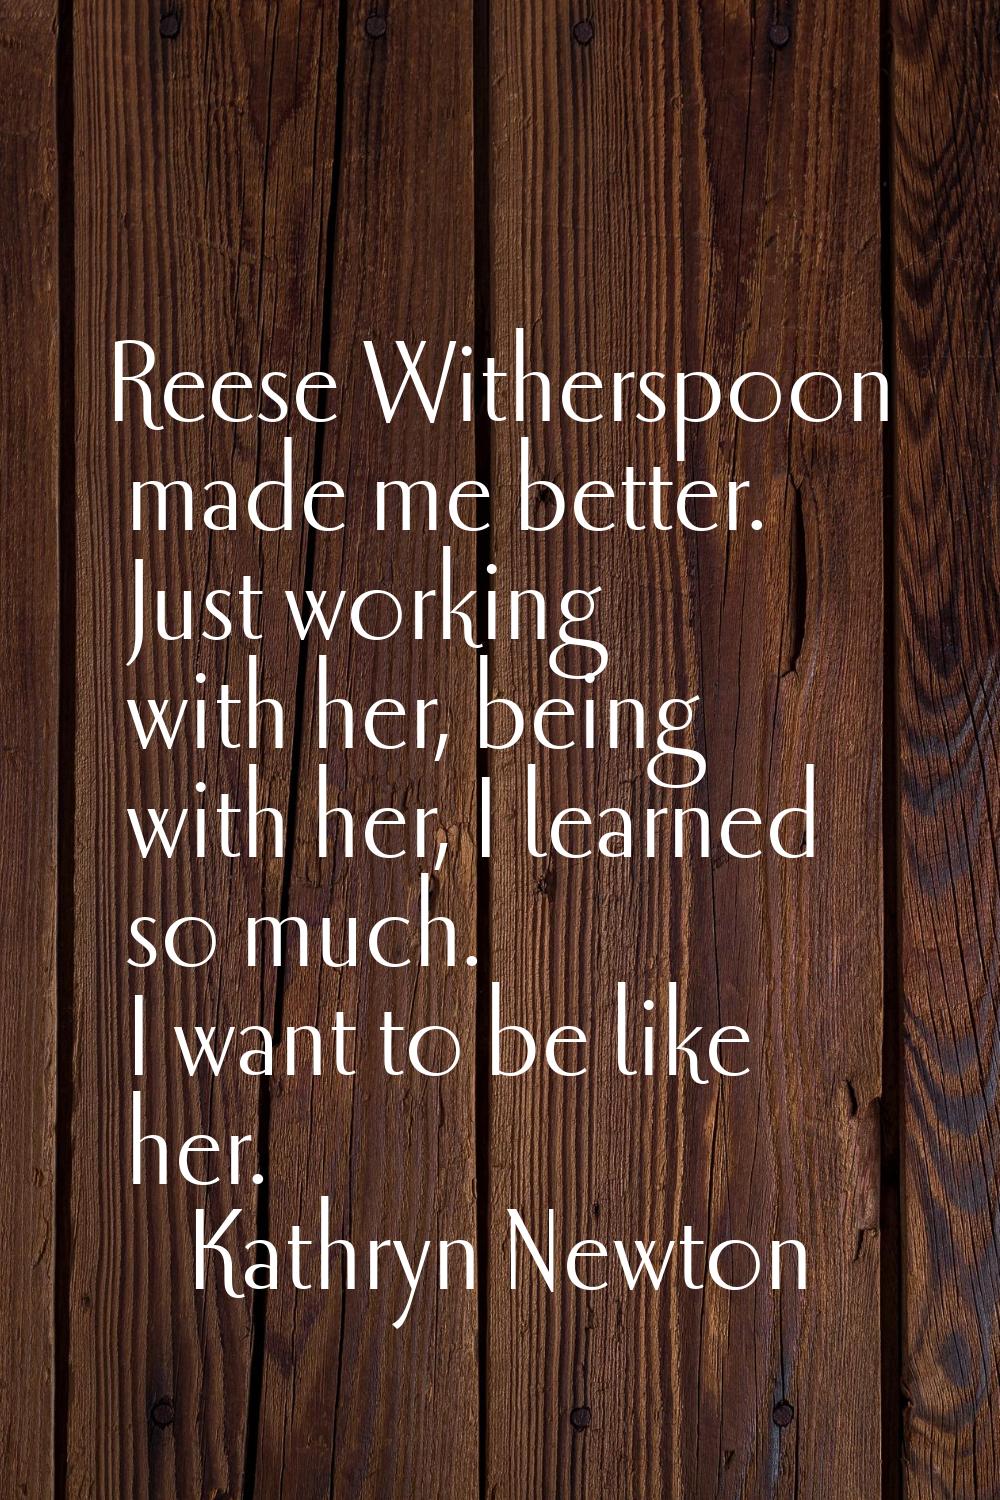 Reese Witherspoon made me better. Just working with her, being with her, I learned so much. I want 